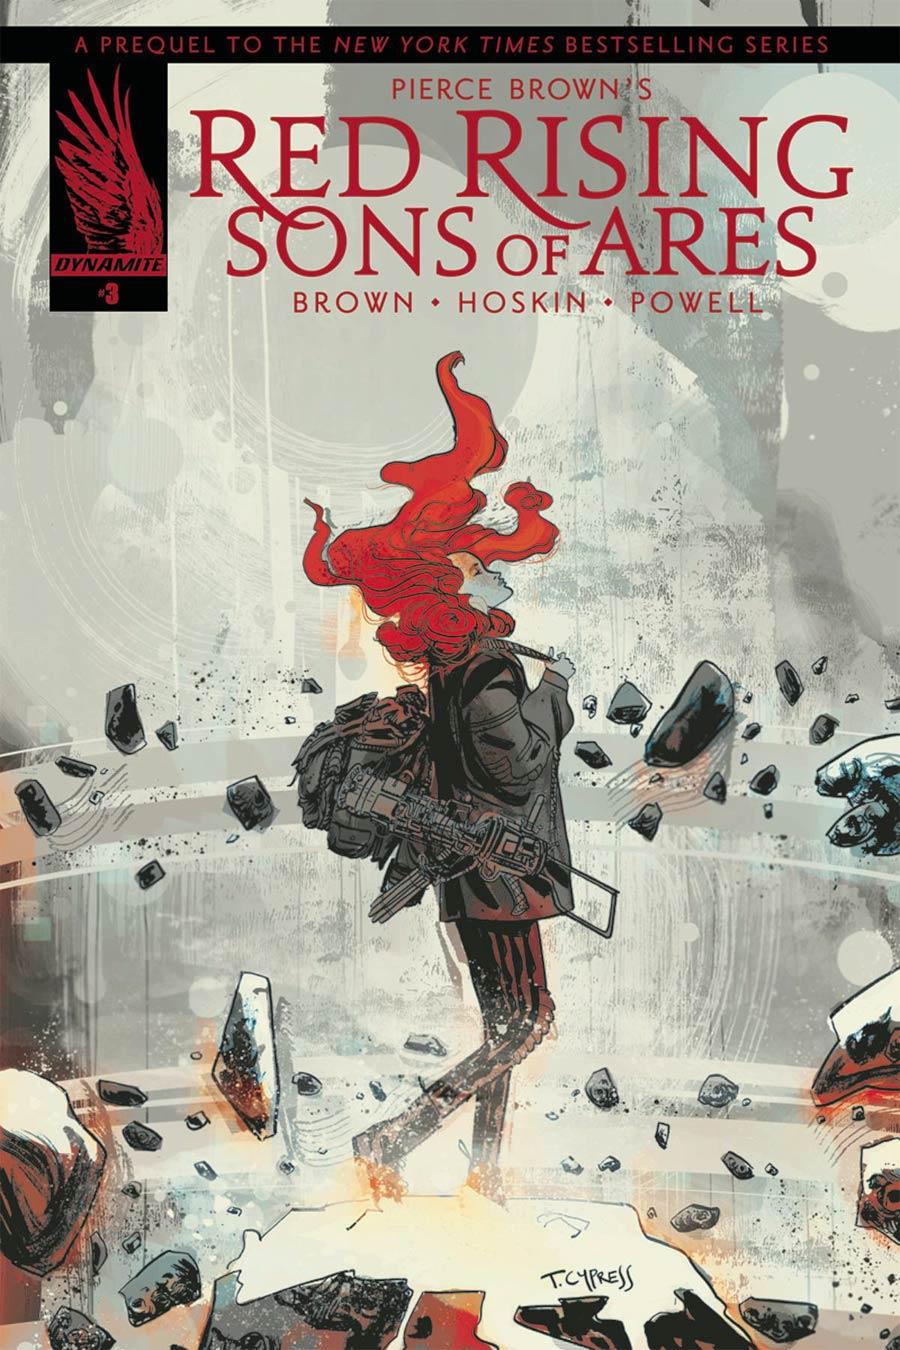 Pierce Browns Red Rising Sons Of Ares Vol. 1 #3